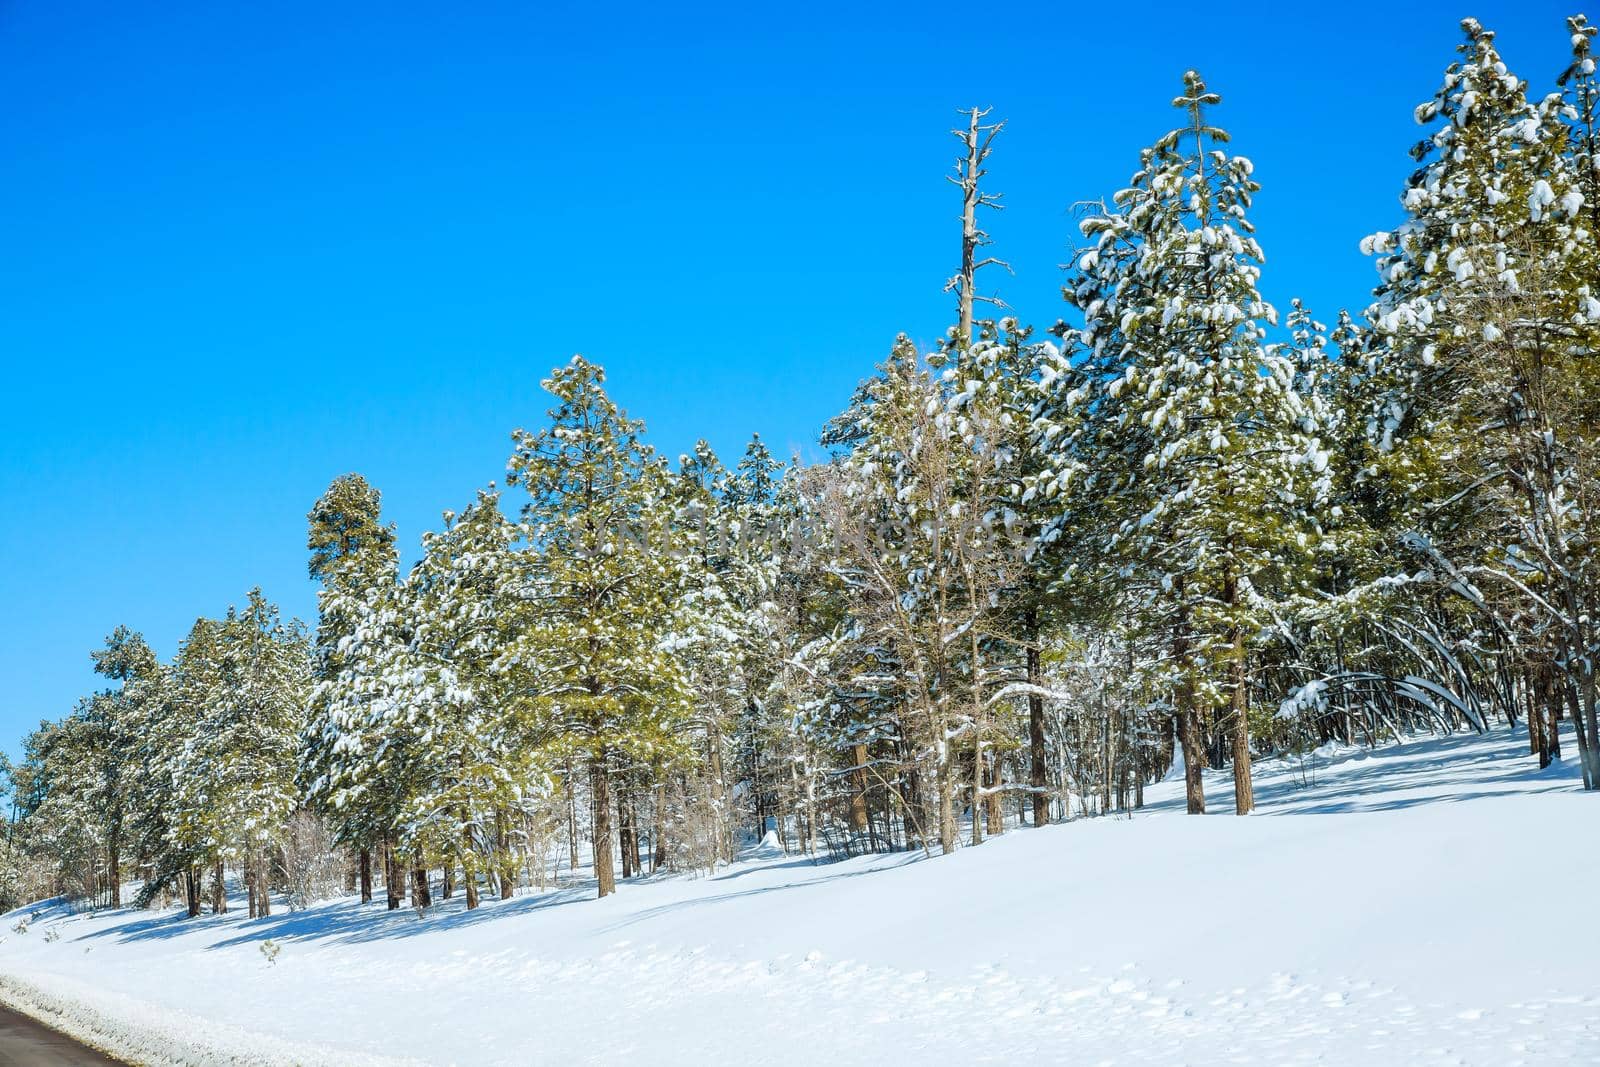 Arizona landscape winter season mountains of trees covered snow by ungvar